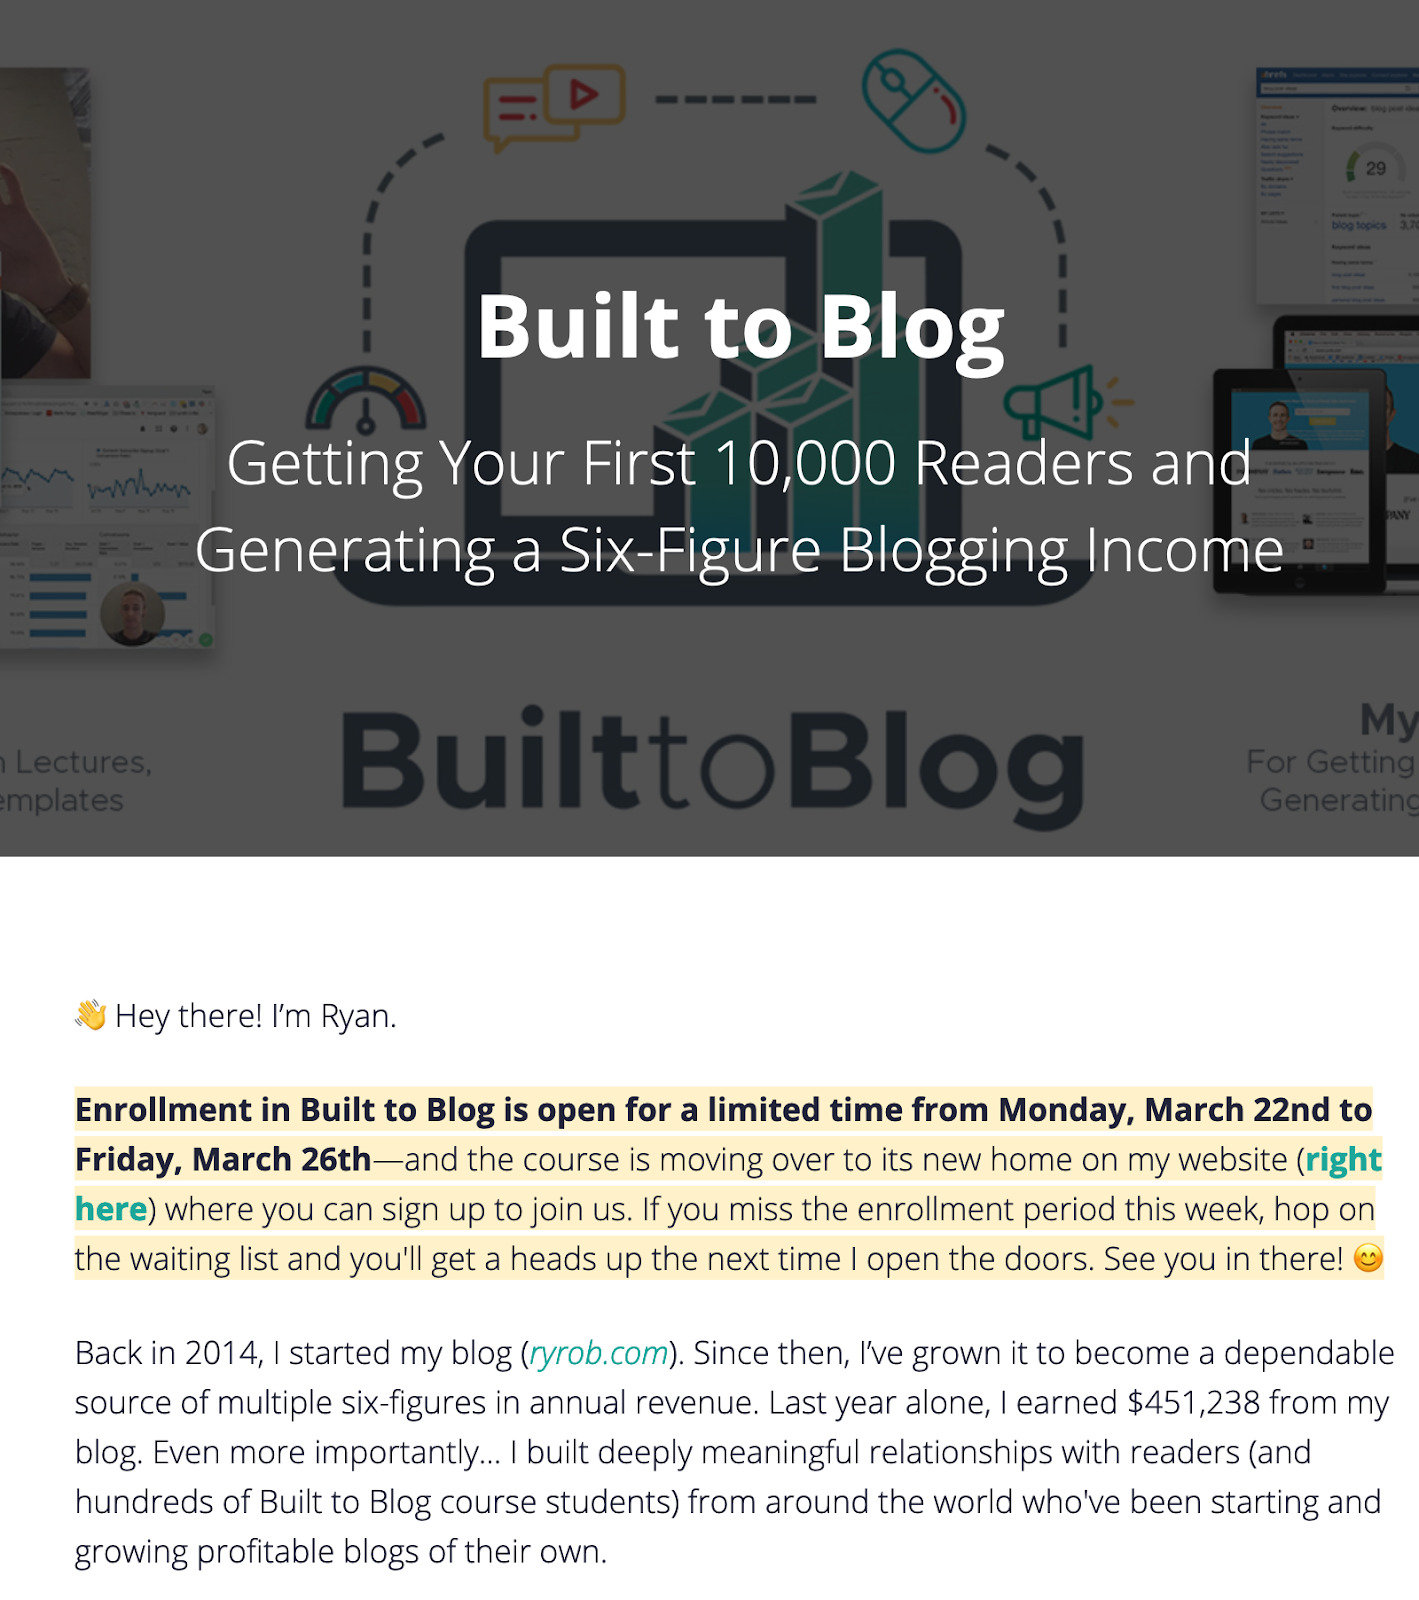 Page about the "Built to Blog" course